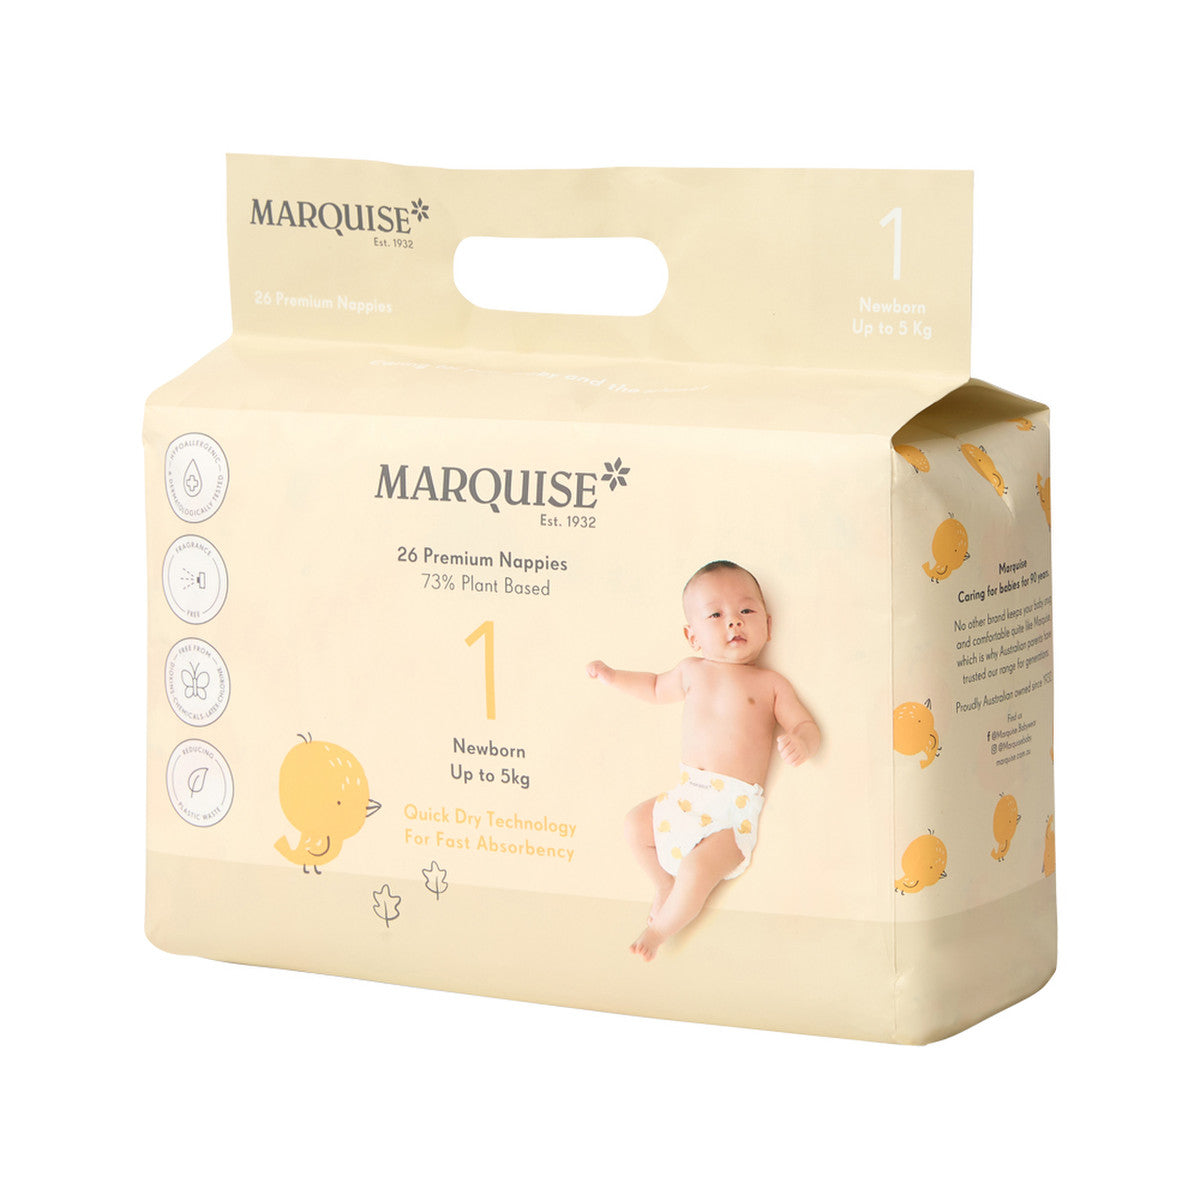 MARQUISE Premium Nappies (73% Plant Based) Newborn Size 1 (Up to 5kg) x 26 Pack